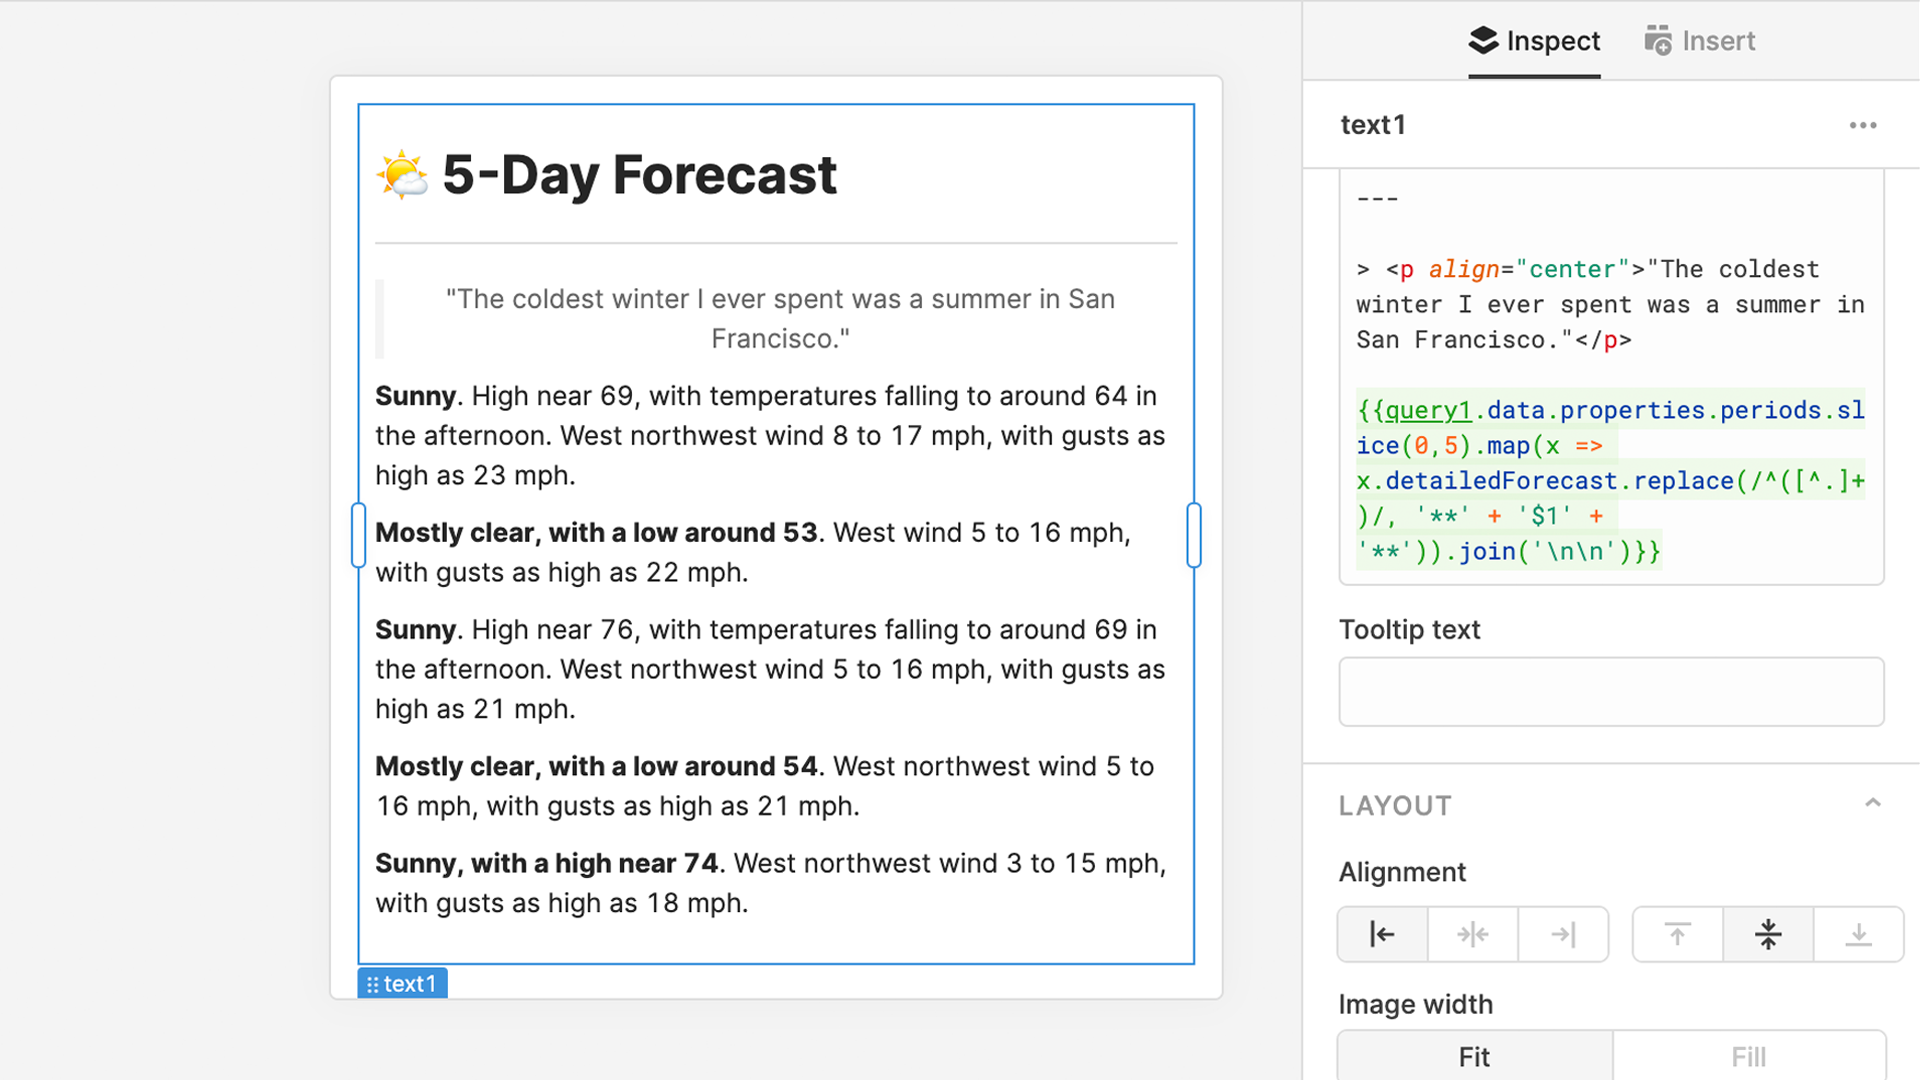 Trim the forecast down to 5 days and add formatting